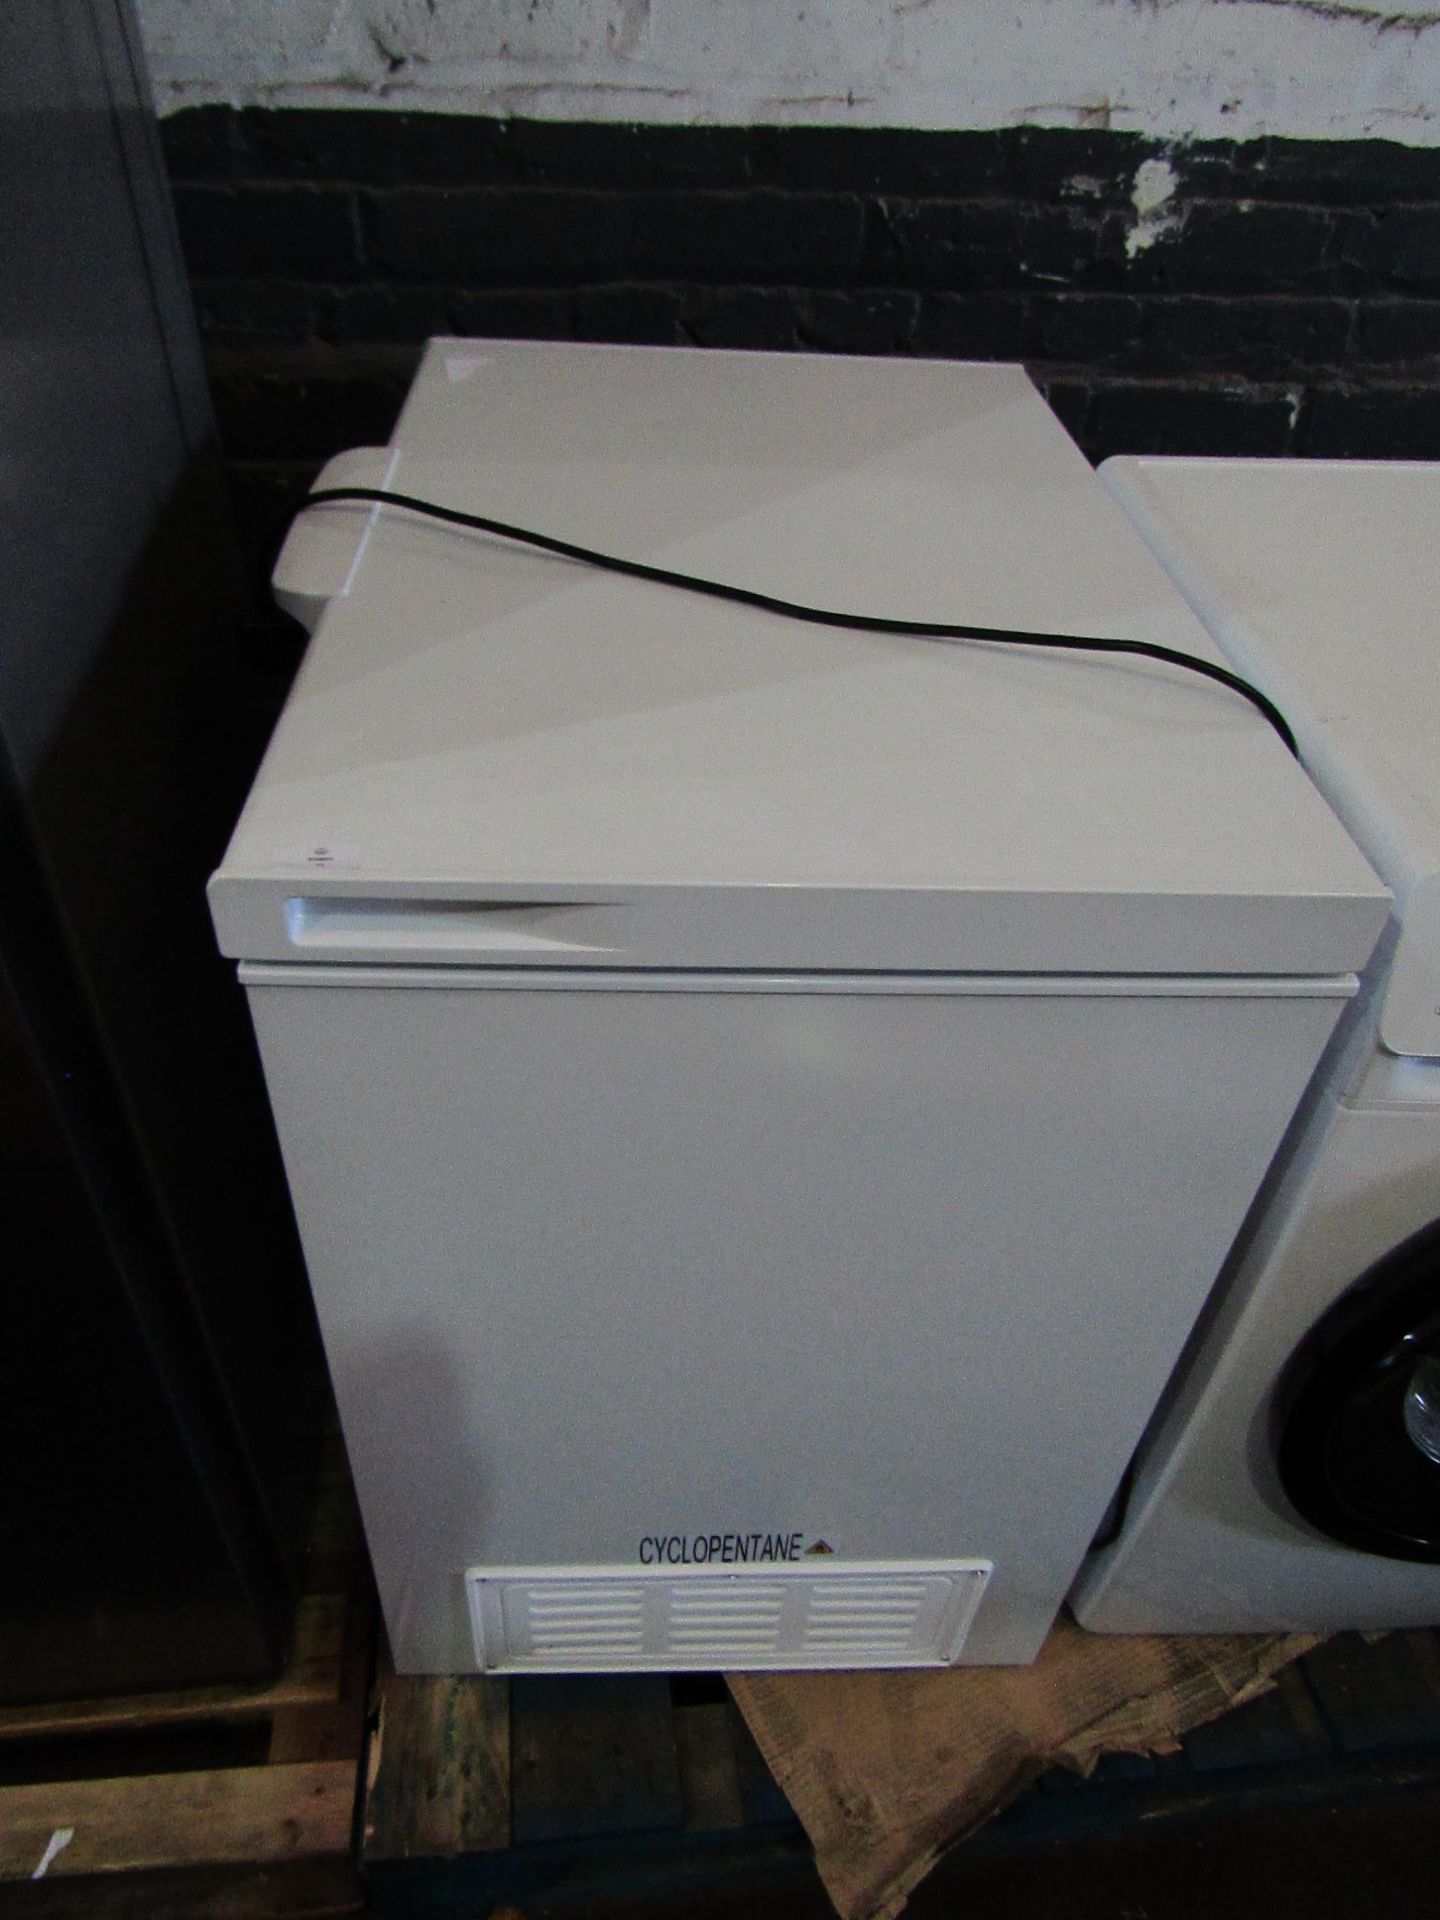 Hisense Chest freezer, has been used but still in good condition, tested and working for coldness